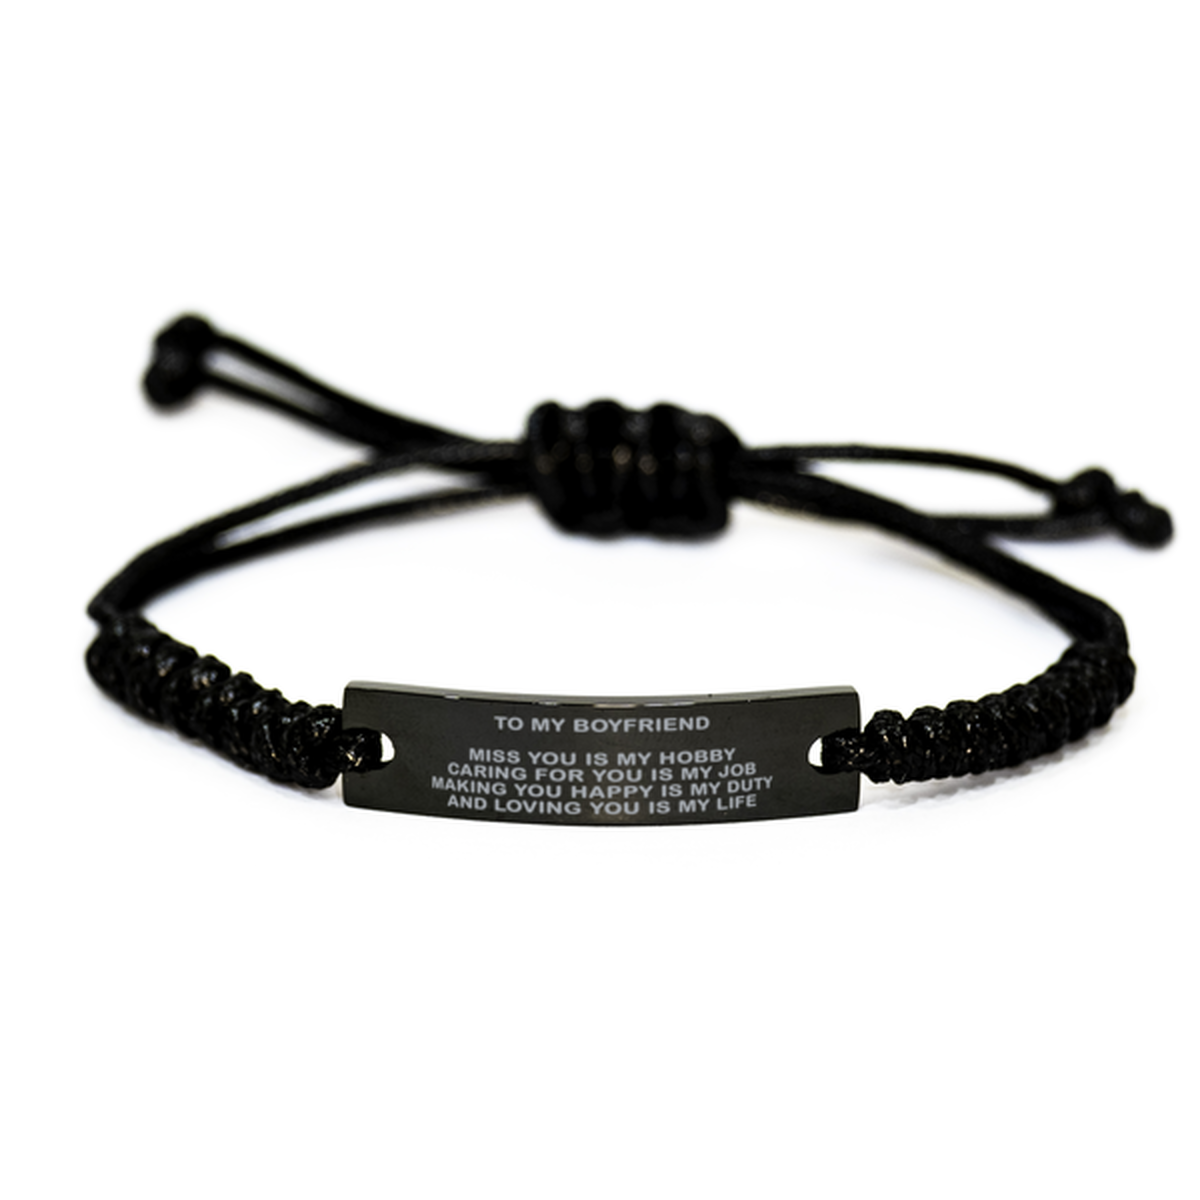 To My Boyfriend Rope Bracelet, Loving You Is My Life, Valentines  Gifts For Boyfriend From Girlfriend, Birthday Gifts For Men